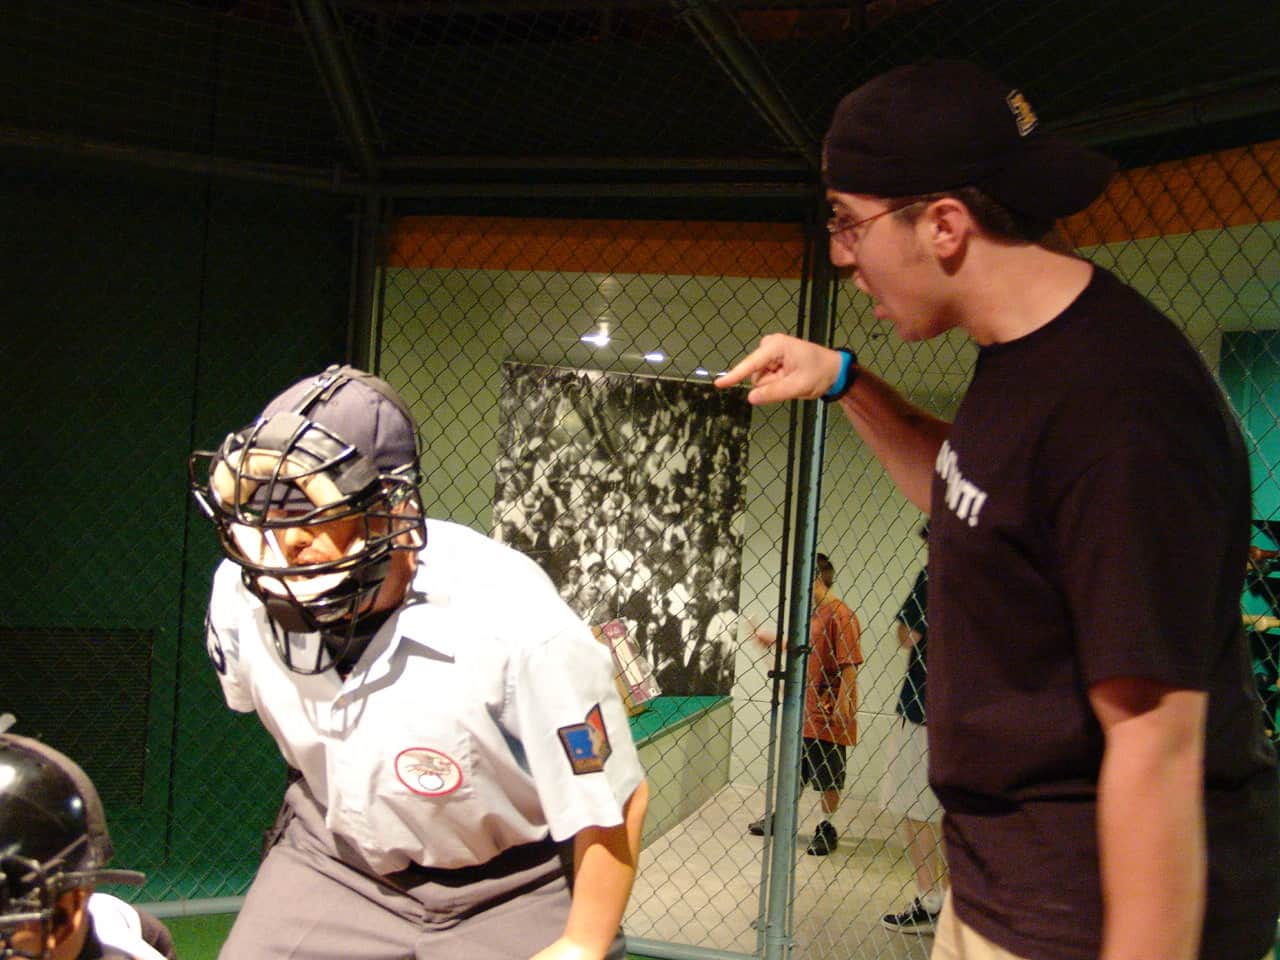 Manoli arguing with an umpire at the Louisville Slugger Museum in Louisville, Kentucky